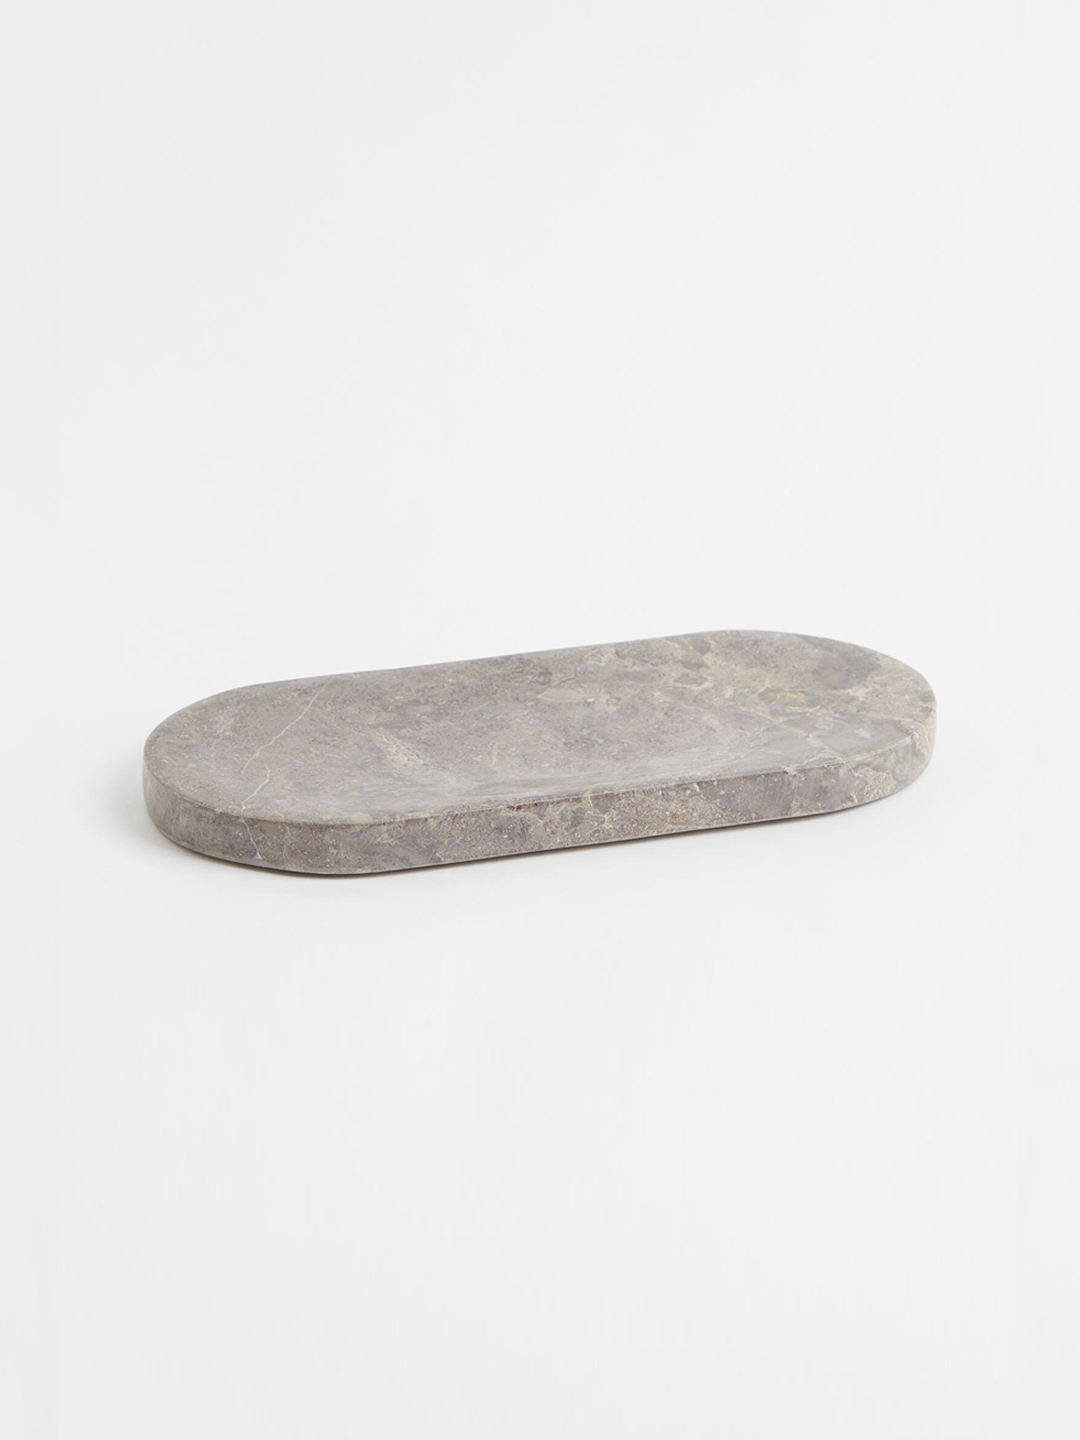 H&M Grey Marble Tray